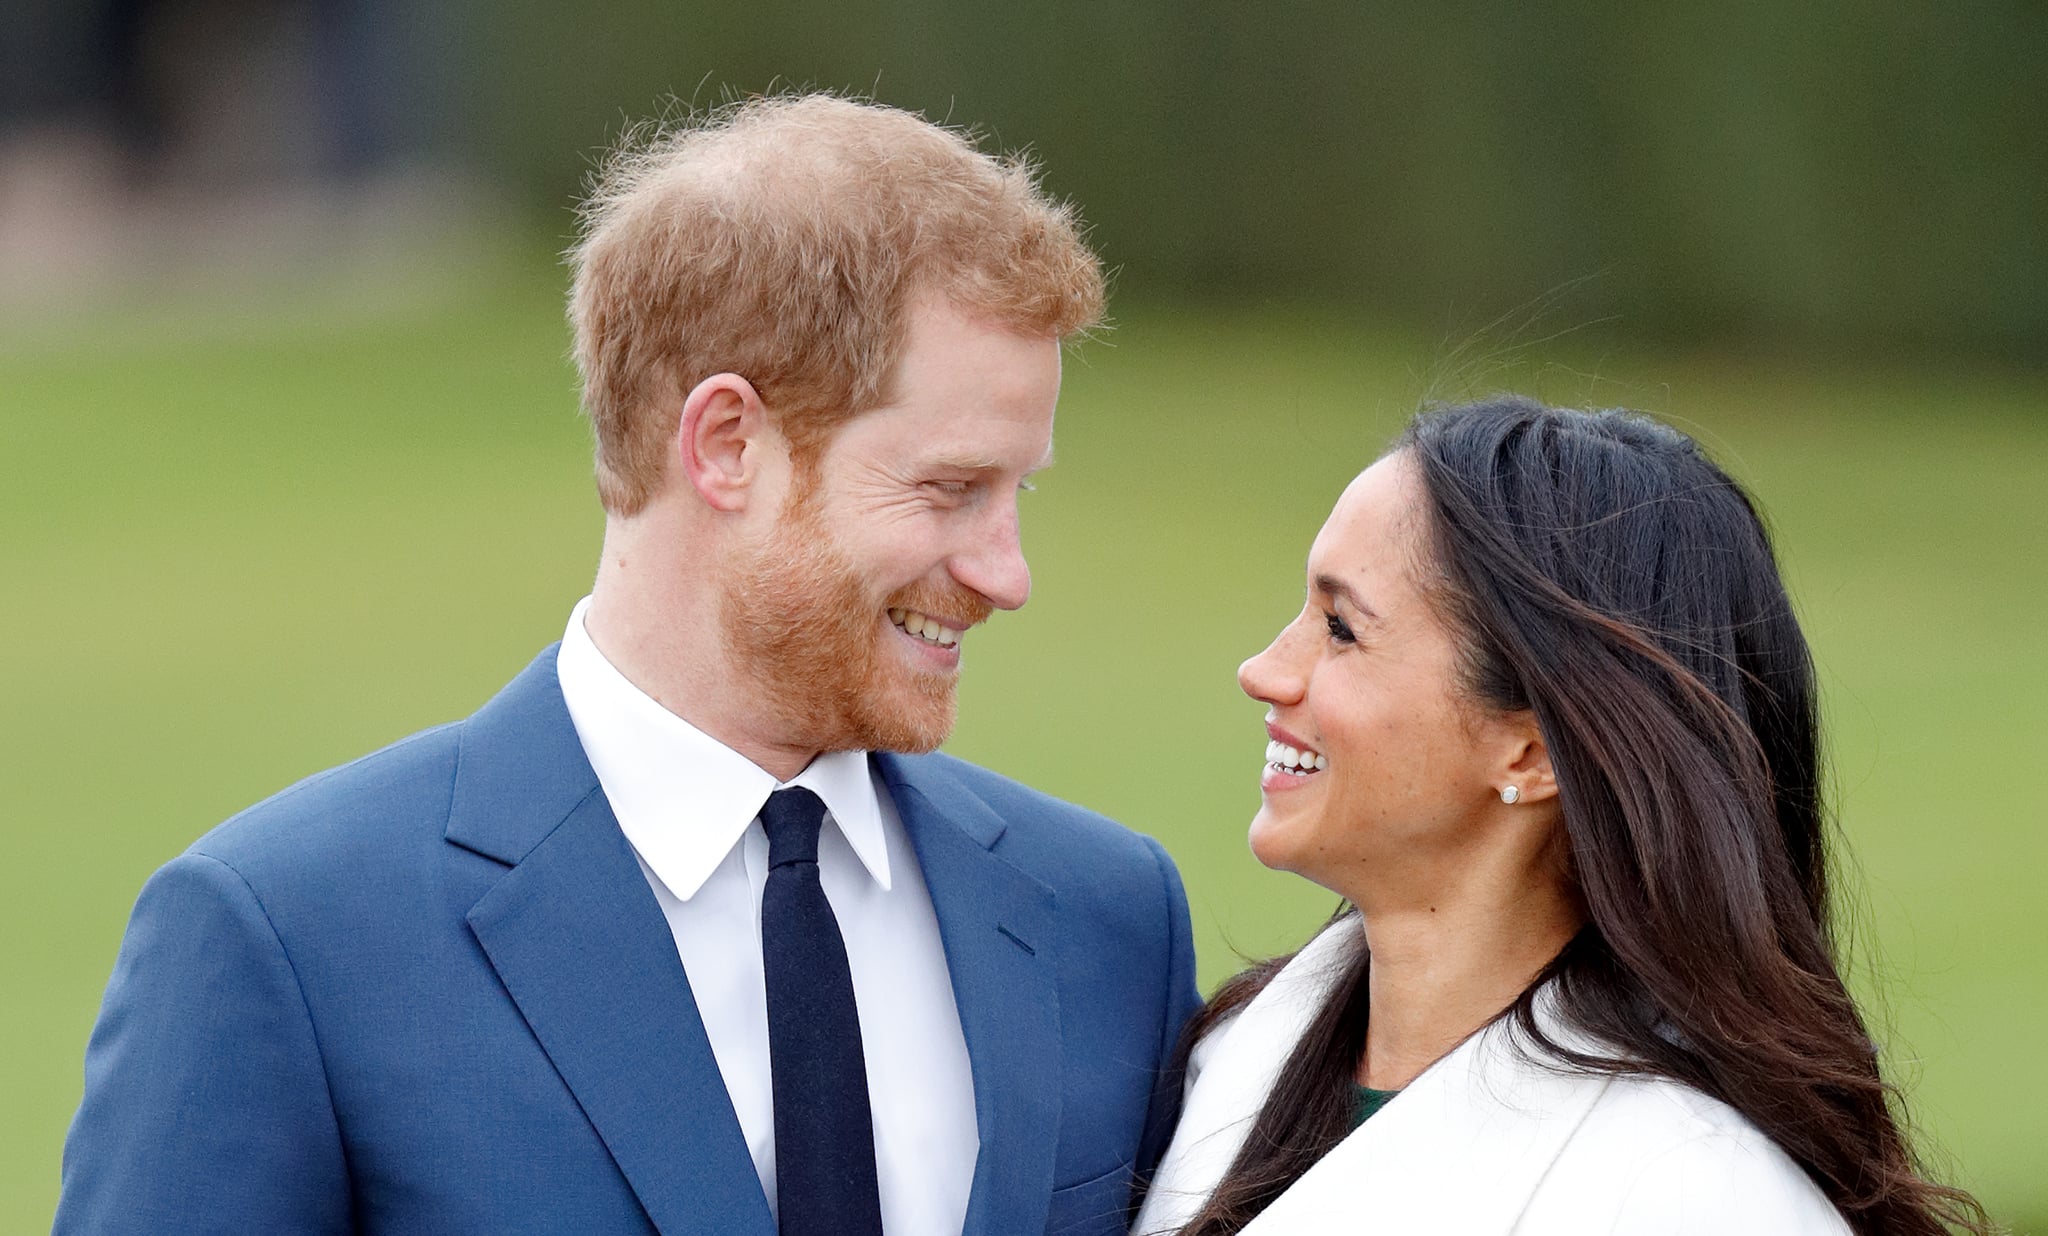 LONDON, UNITED KINGDOM - NOVEMBER 27: Prince Harry and Meghan Markle attend an official photocall to announce their engagement at the Sunken Gardens at Kensington Palace on November 27, 2017 in London, England.  Prince Harry and Meghan Markle have been officially a couple since November 2016 and are set to marry in spring 2018.  (Photo by Max Mumby/Indigo/Getty Images)